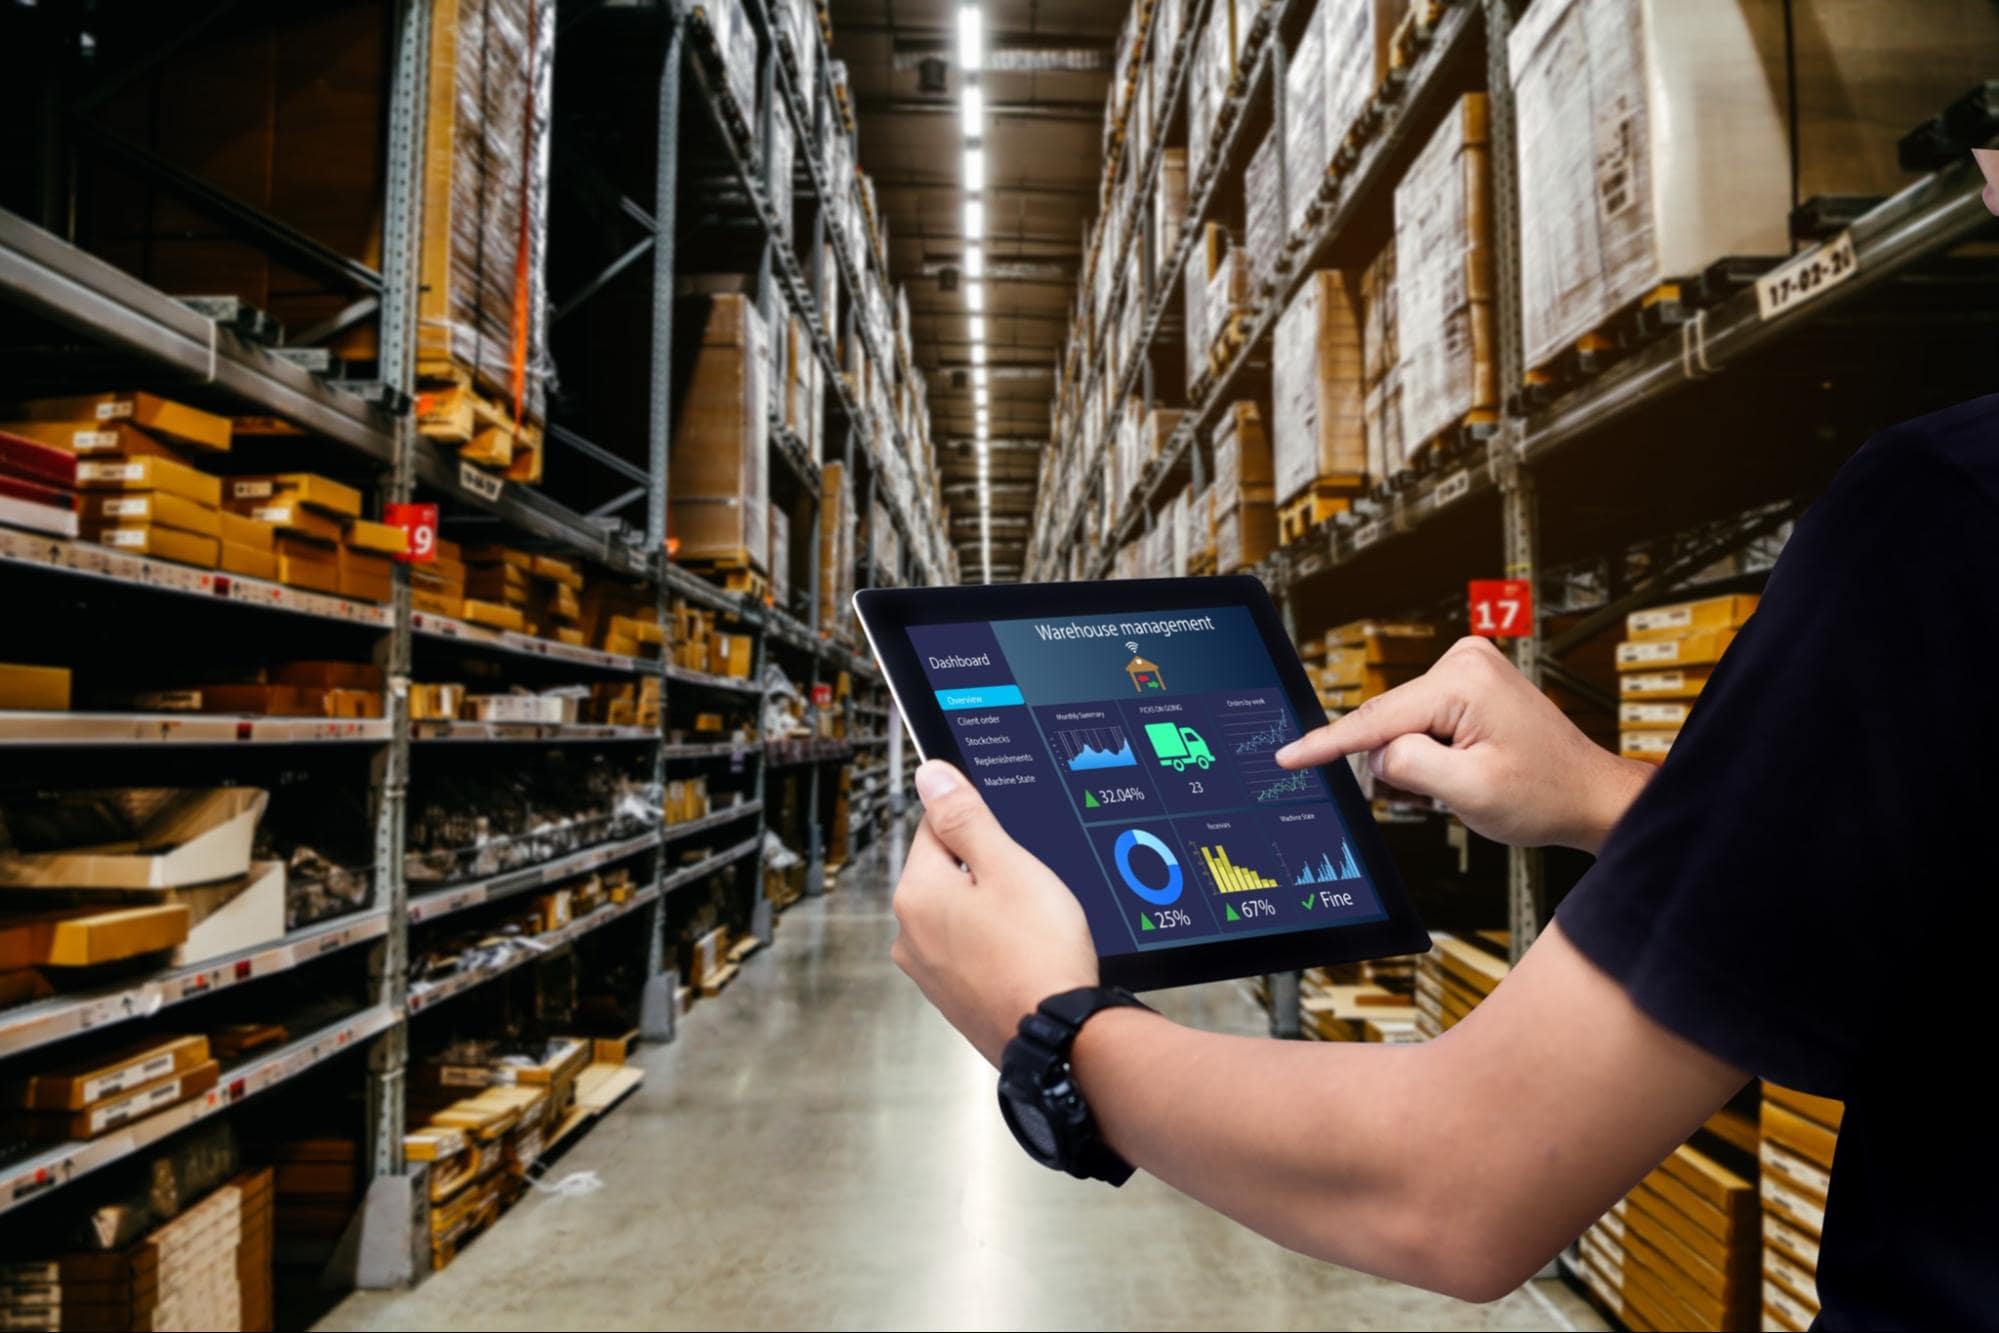 A warehouse manager using an iPad to track logistics.